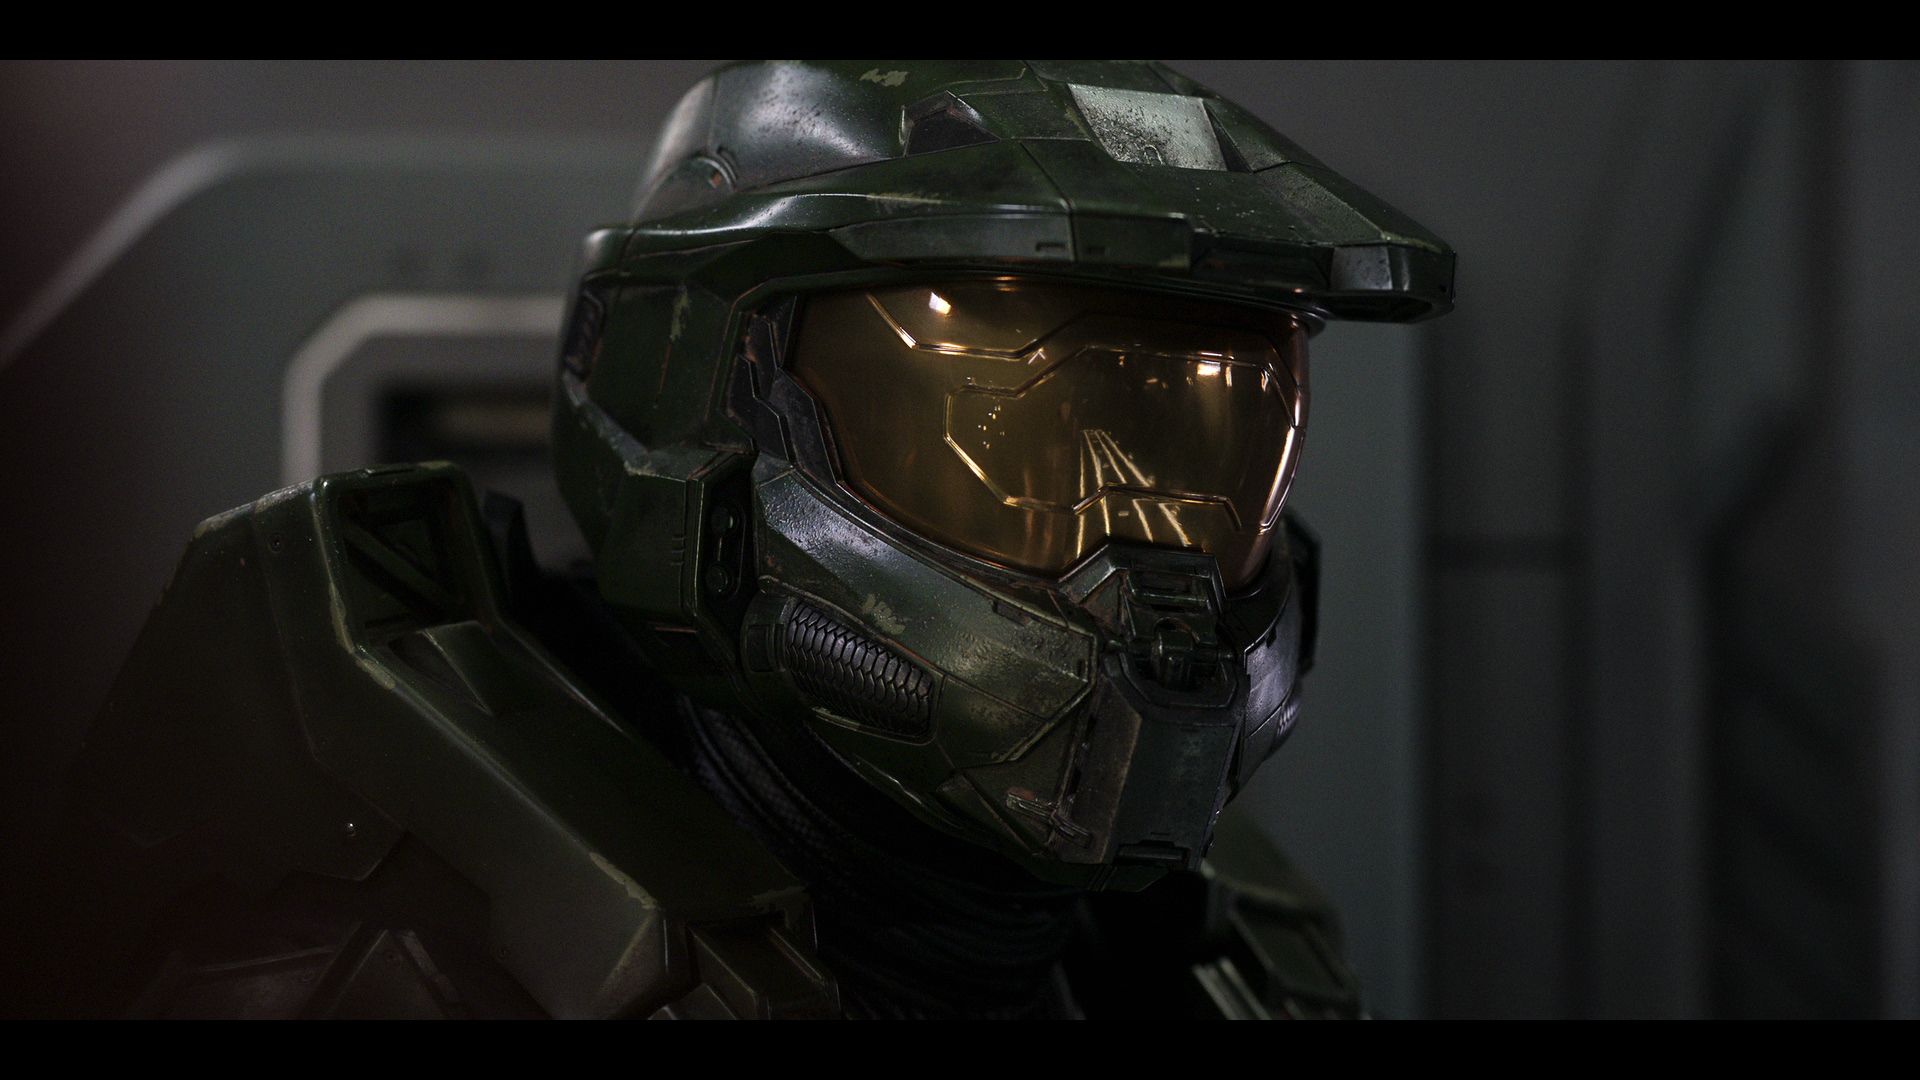 Video game adaptation series 'Halo' trailer unveiled; based on